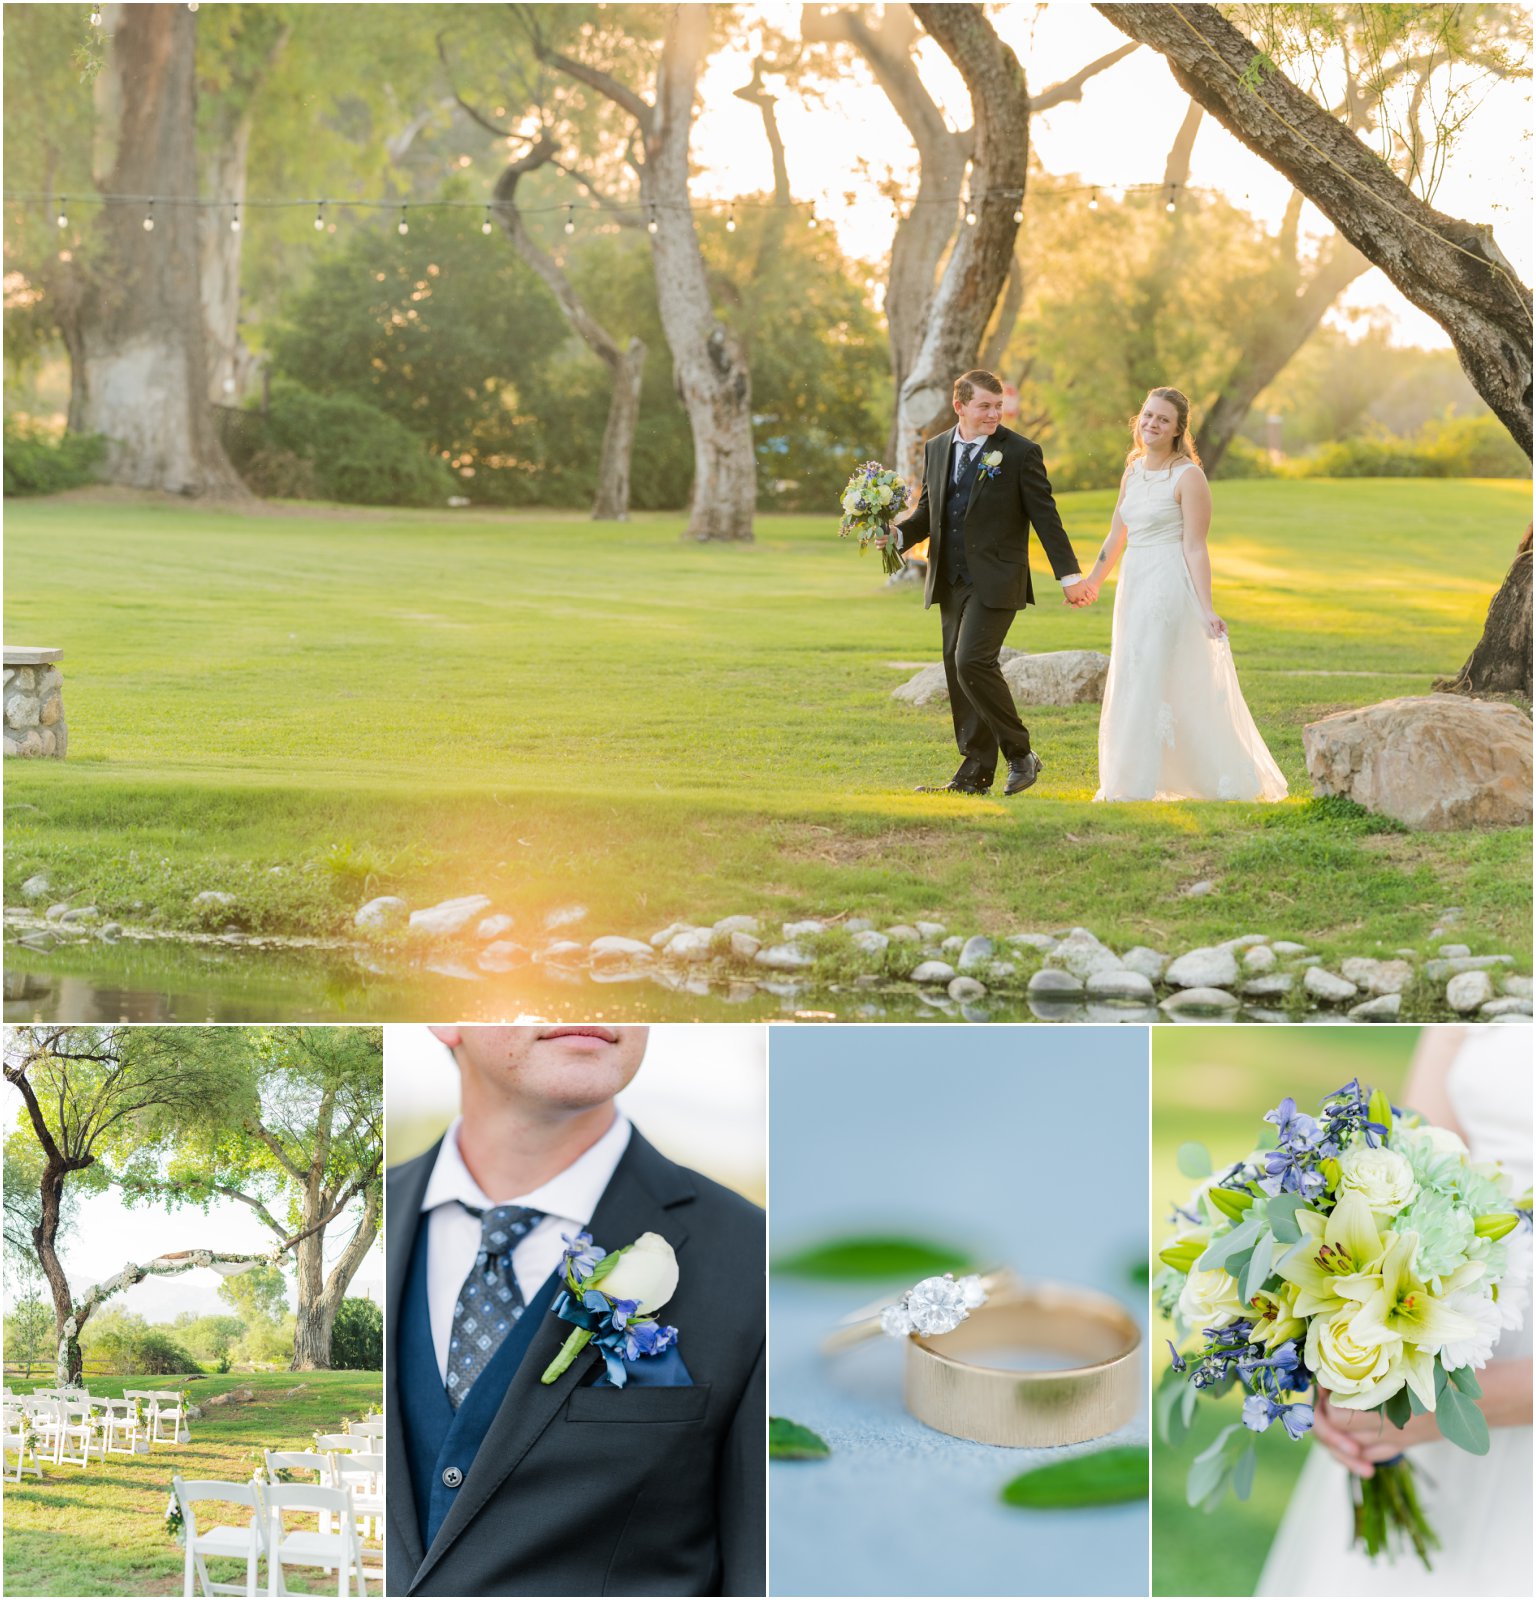 La Mariposa Tucson wedding in summer navy and sage green by Christy Hunter Photography